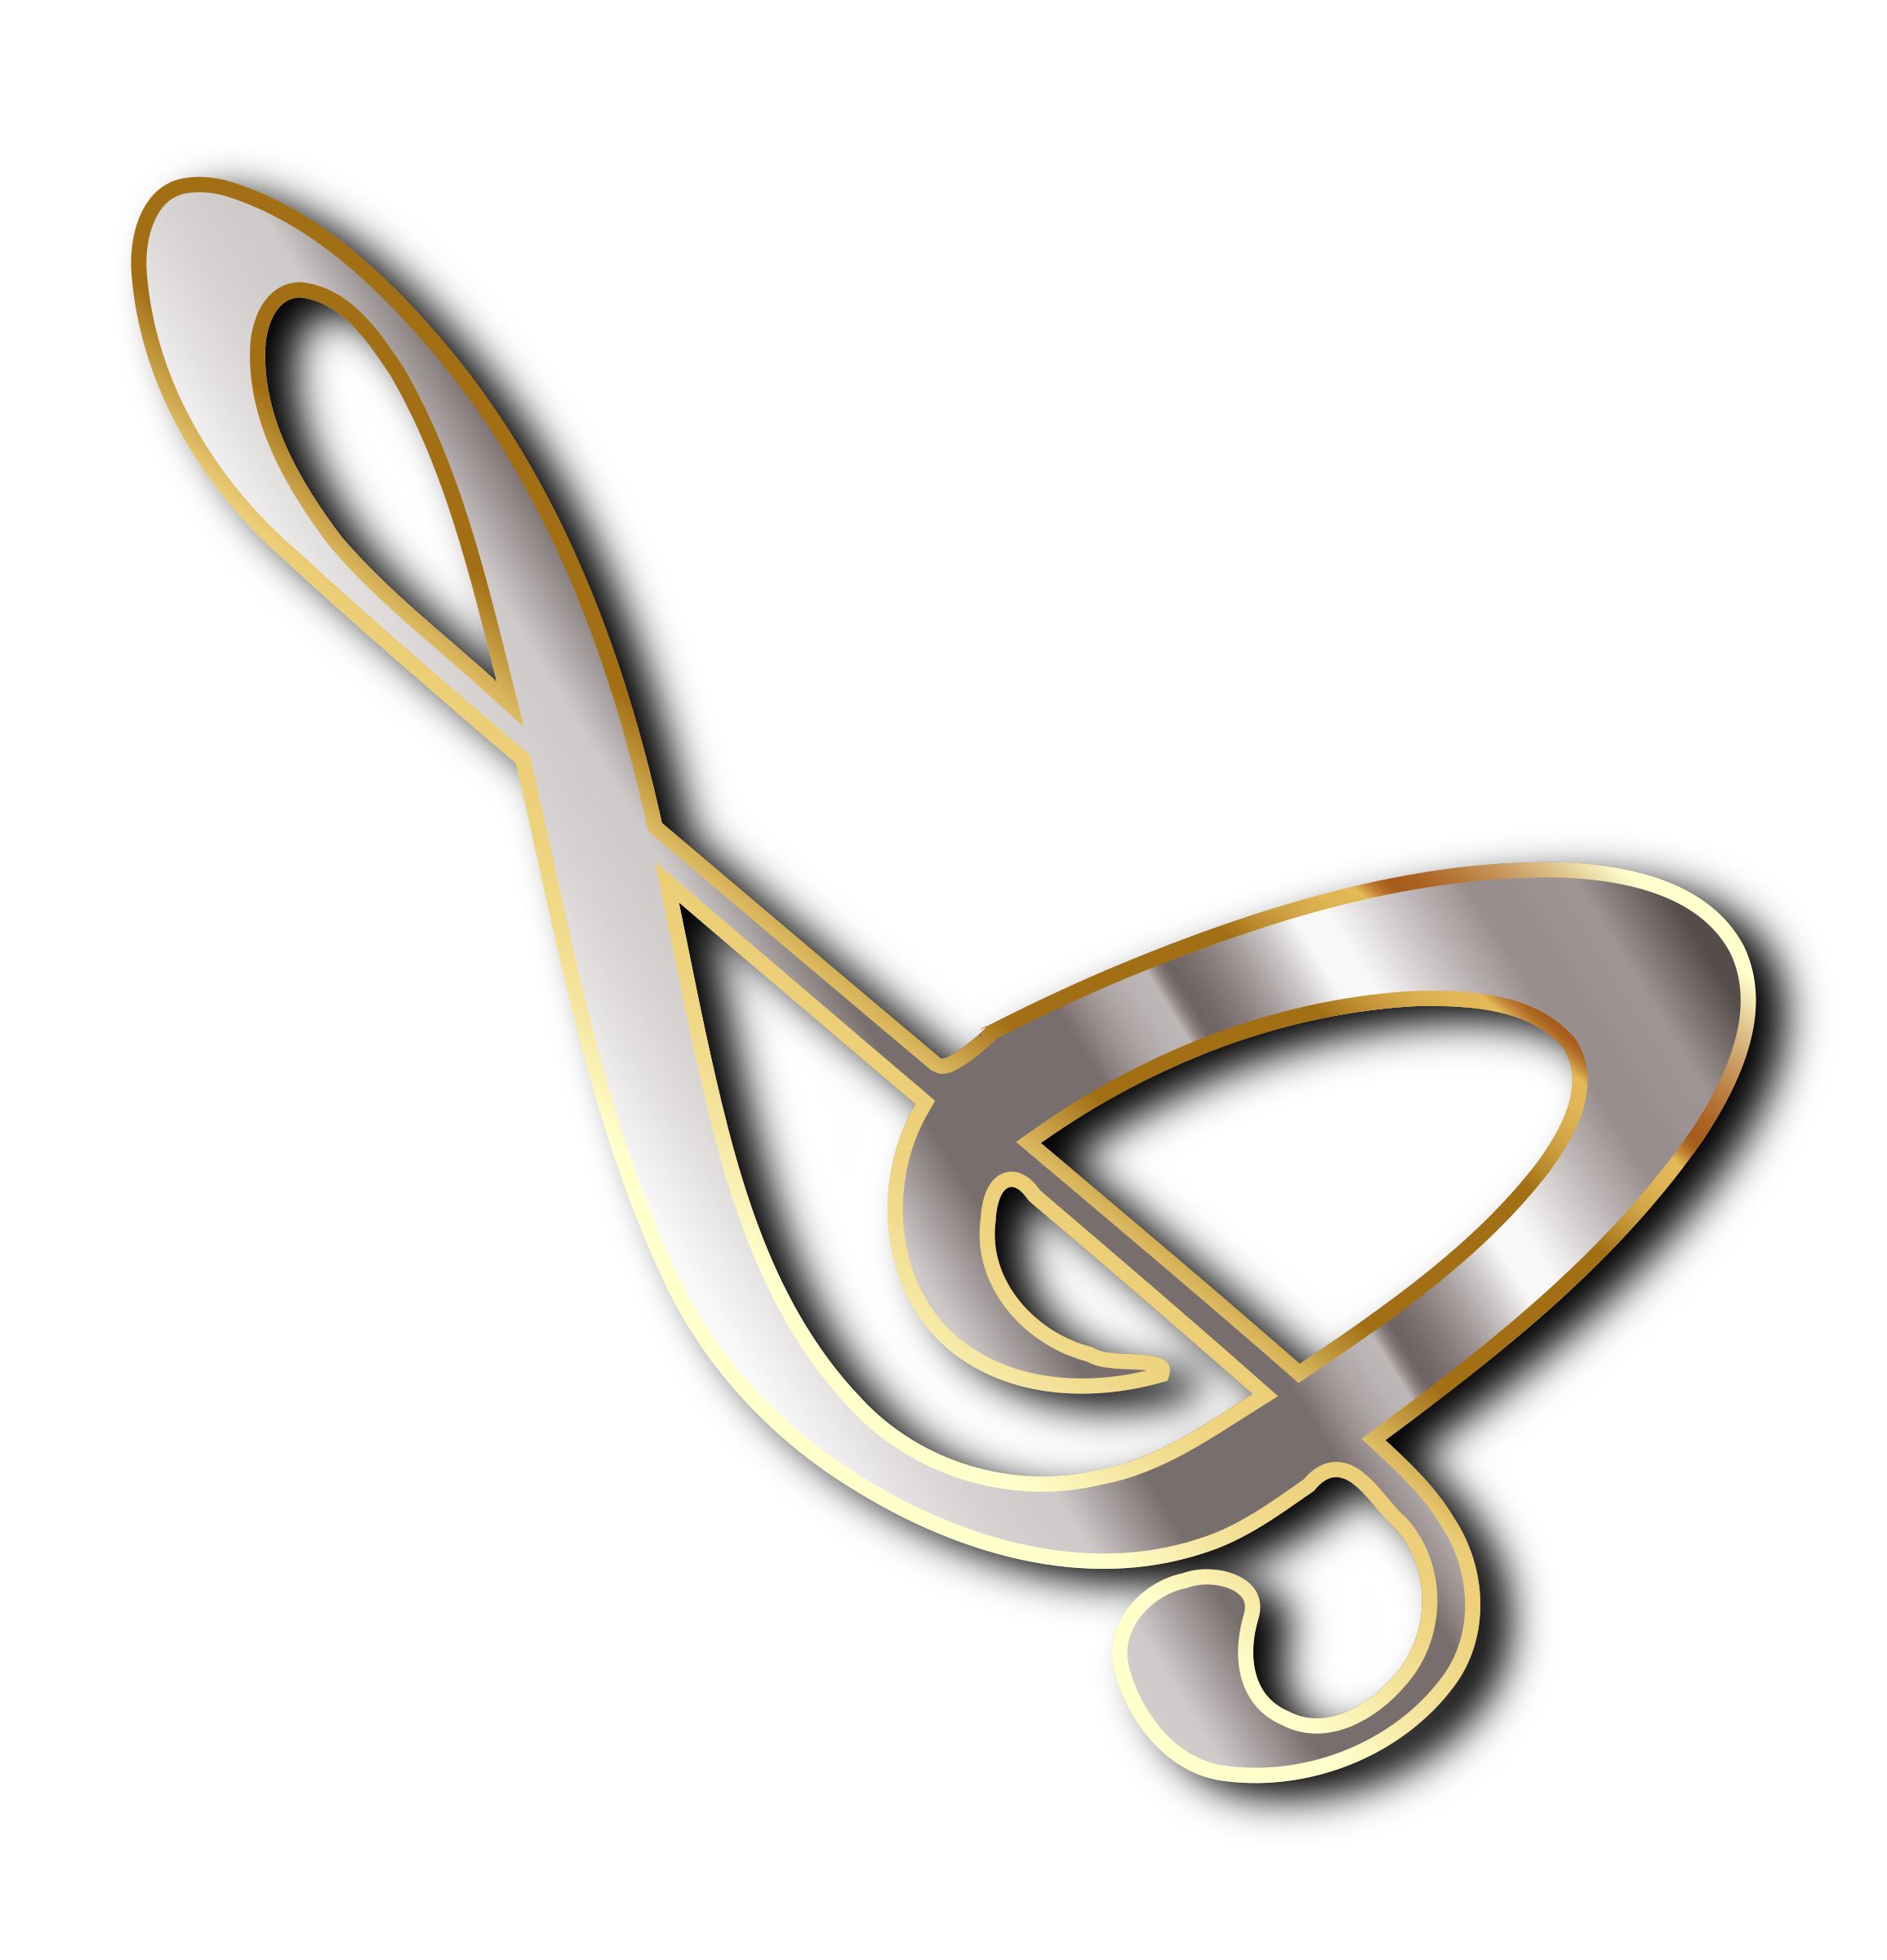 Concert Logo - Silver and Gold SVG Clip arts